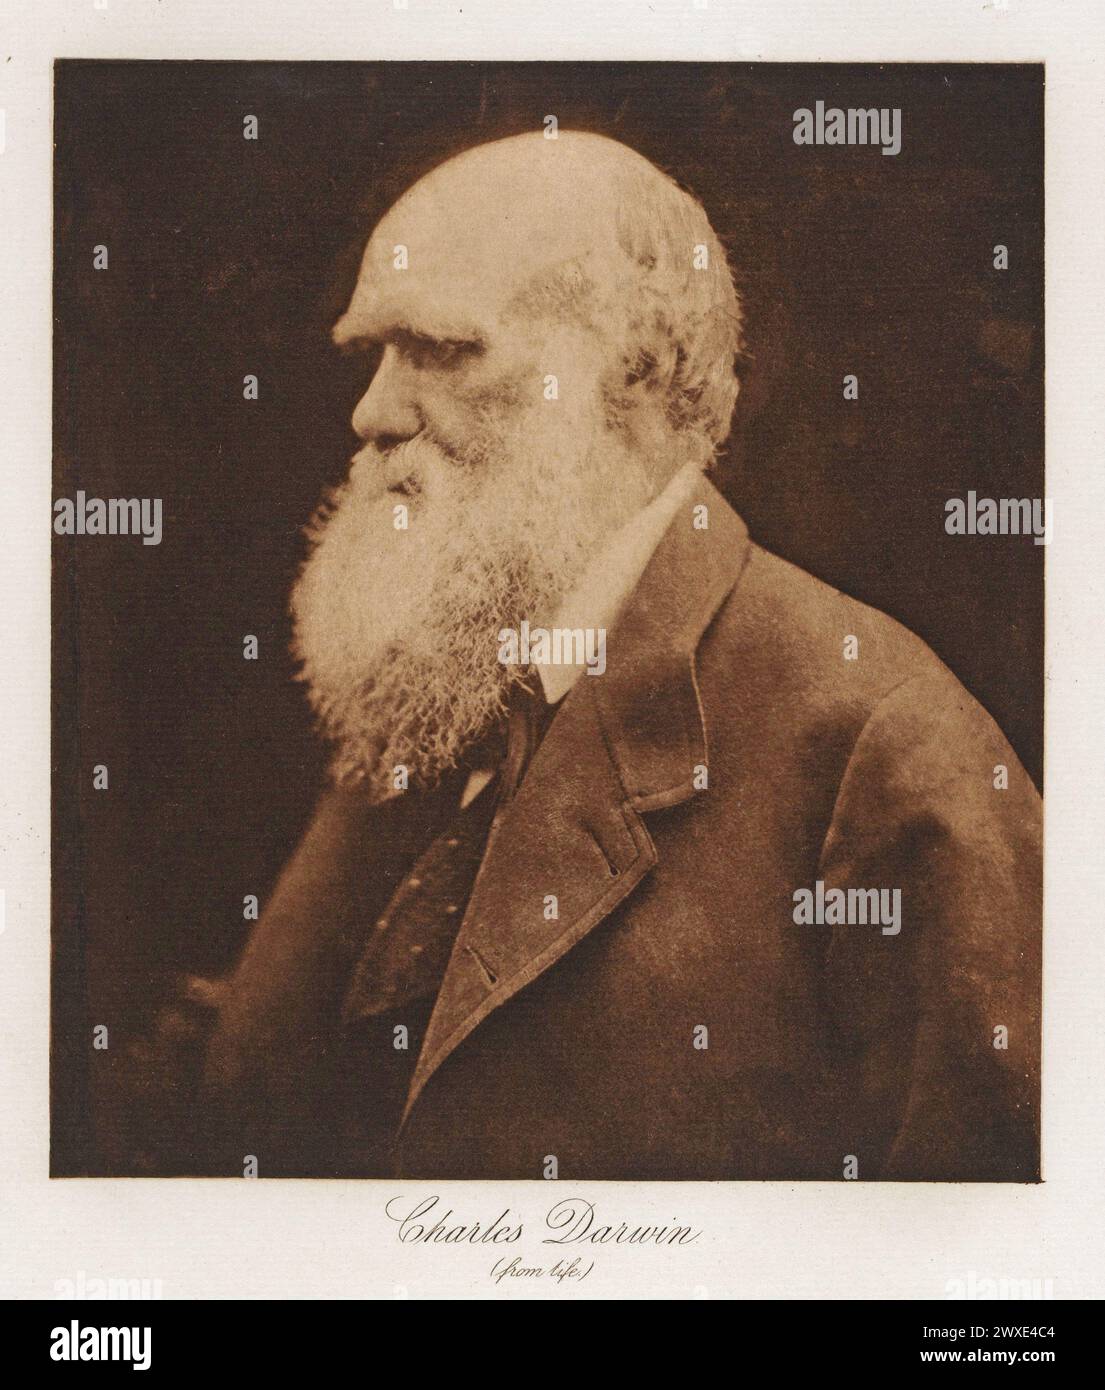 Portrait of  Charles Darwin, photographed by Julia Margaret Cameron between 1888 and 1893. Stock Photo